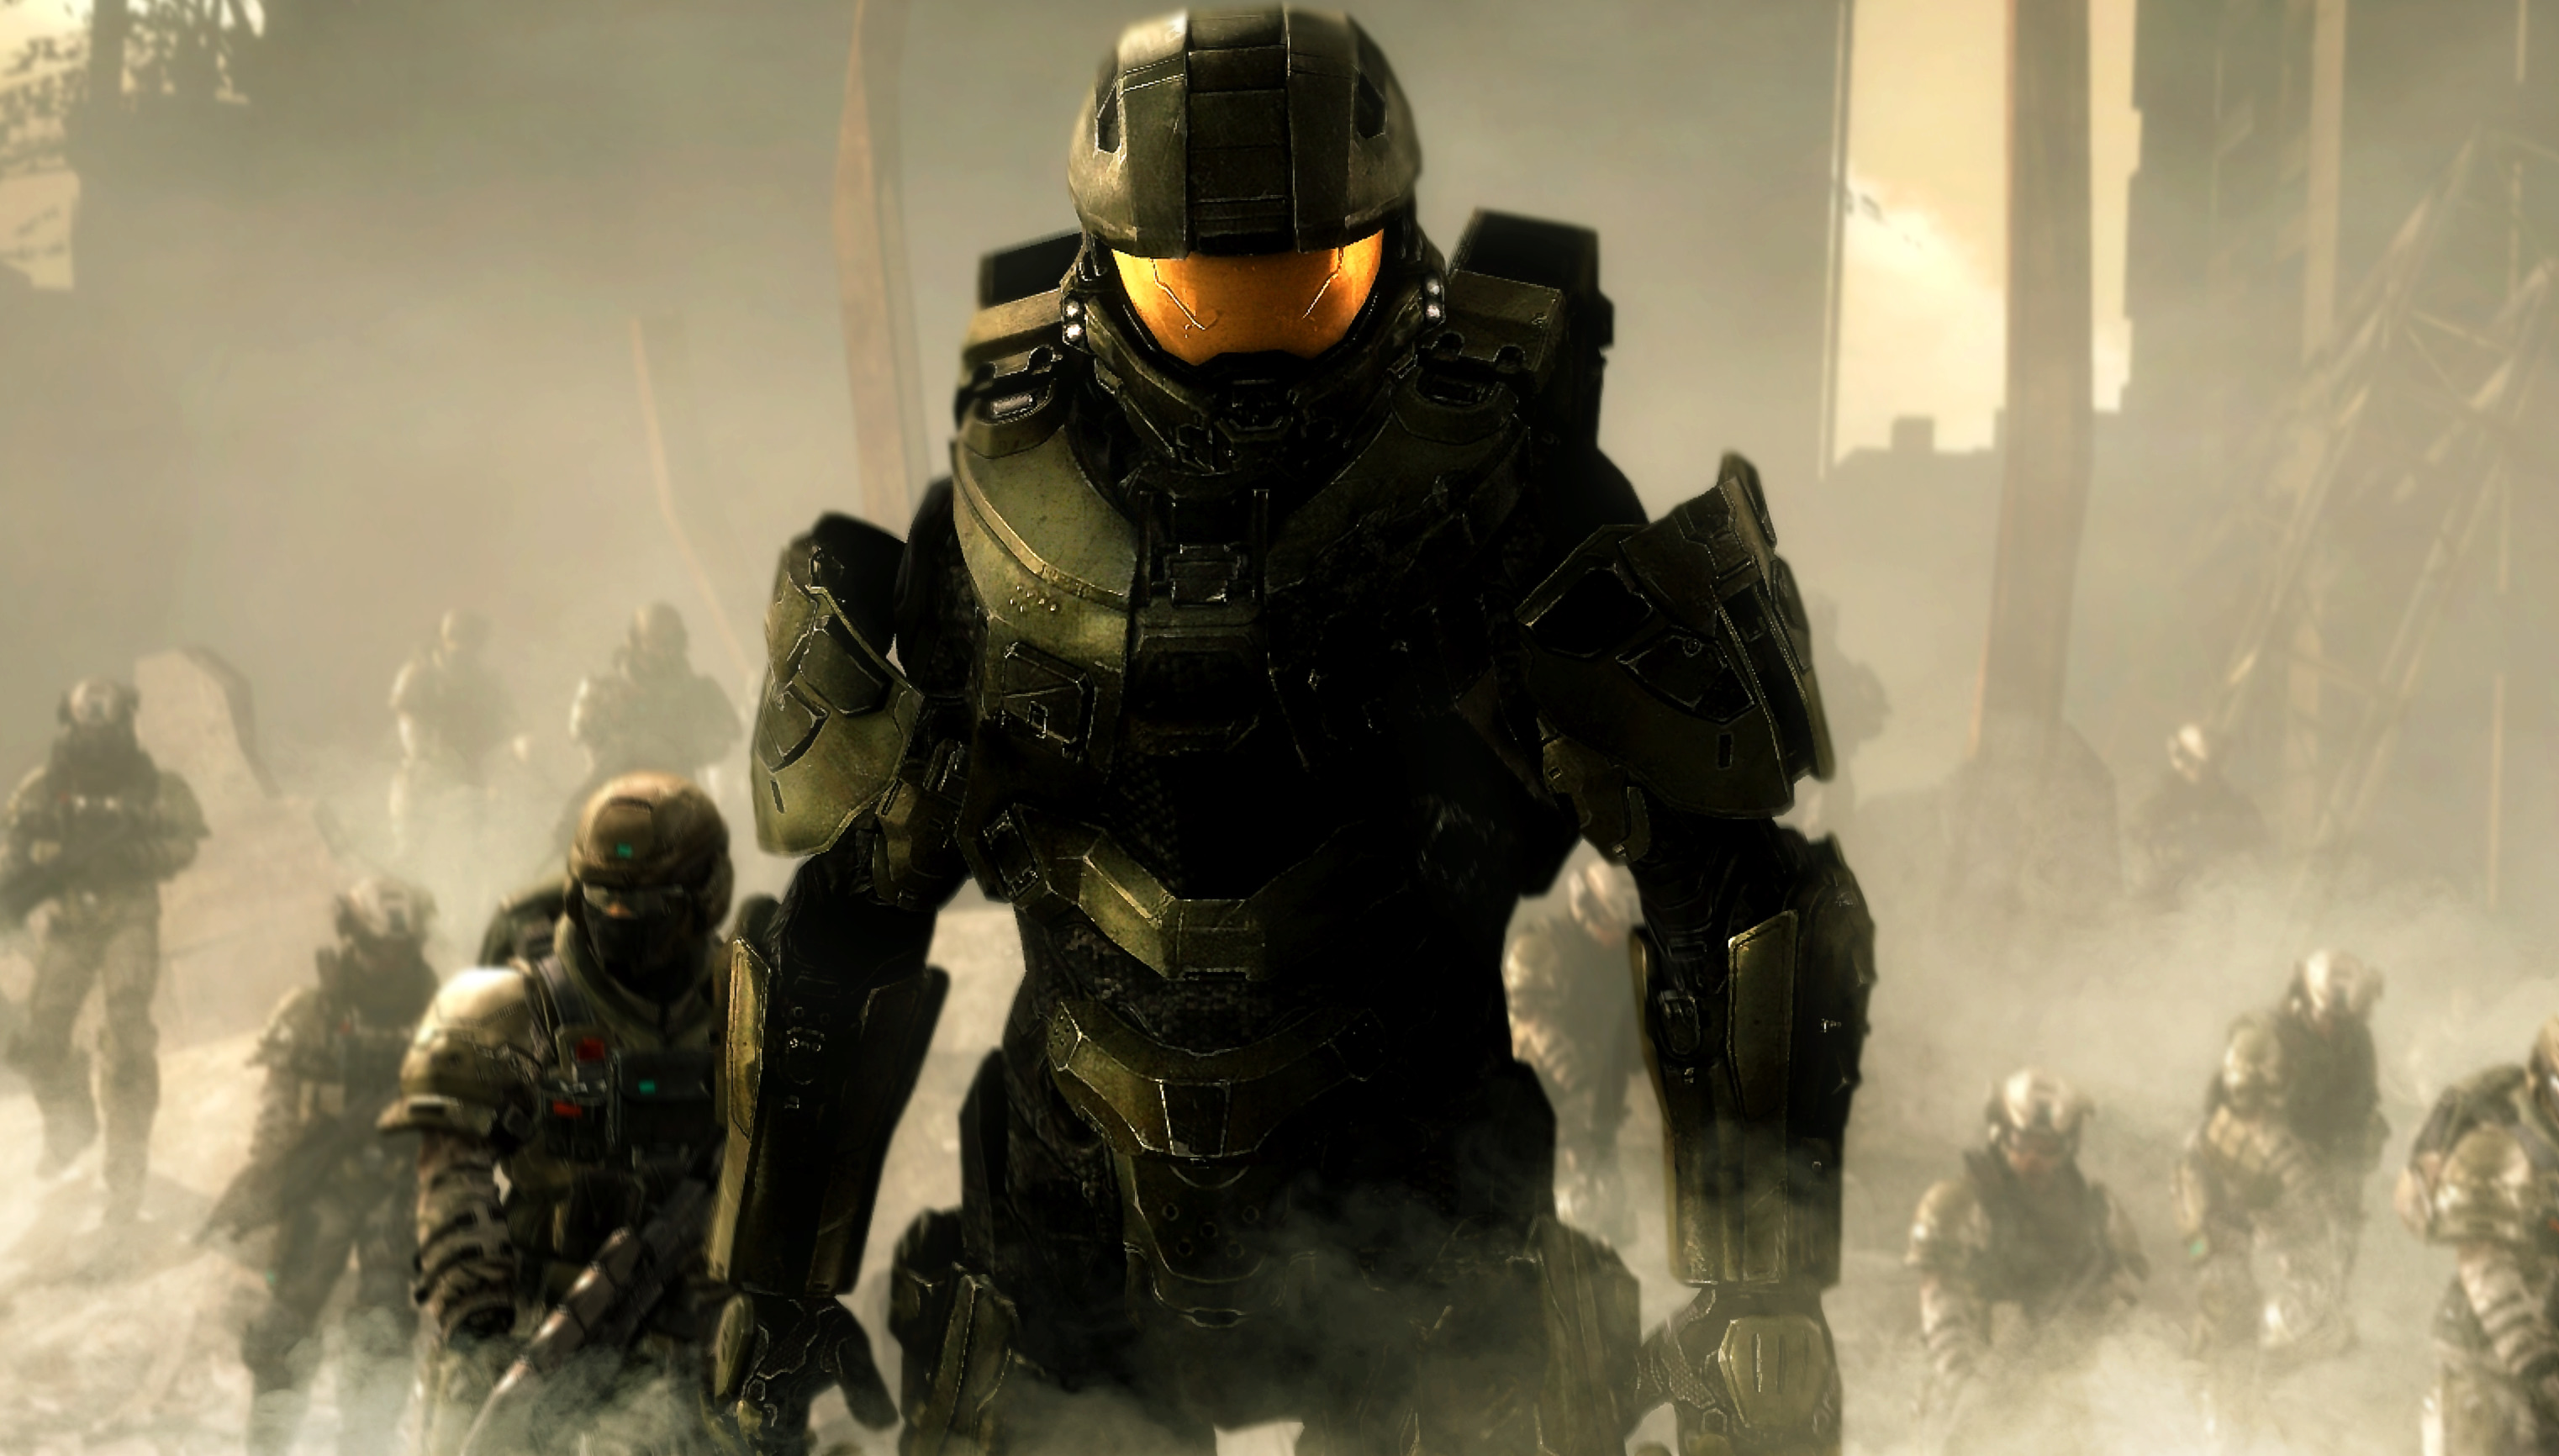 Halo, PC Gaming, Video Games, Halo 4 Wallpaper